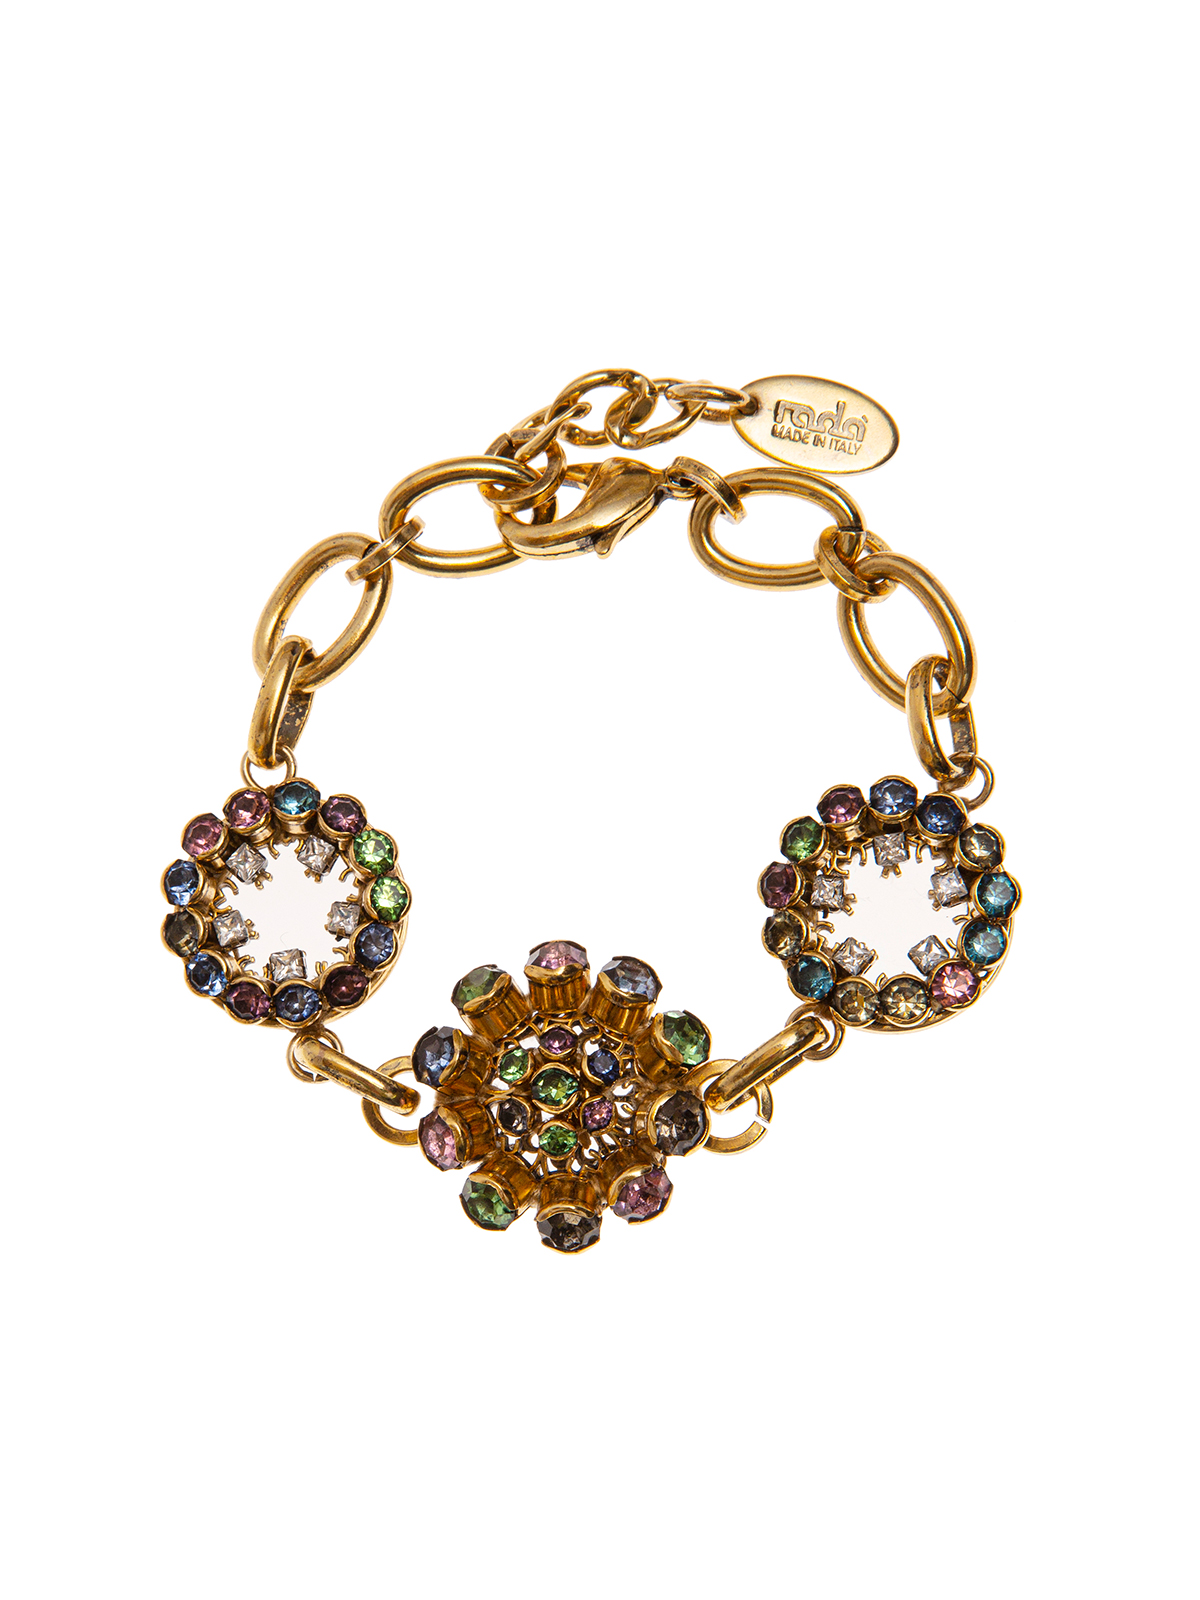 Chain bracelet embellished with filigrees and multicolor stones